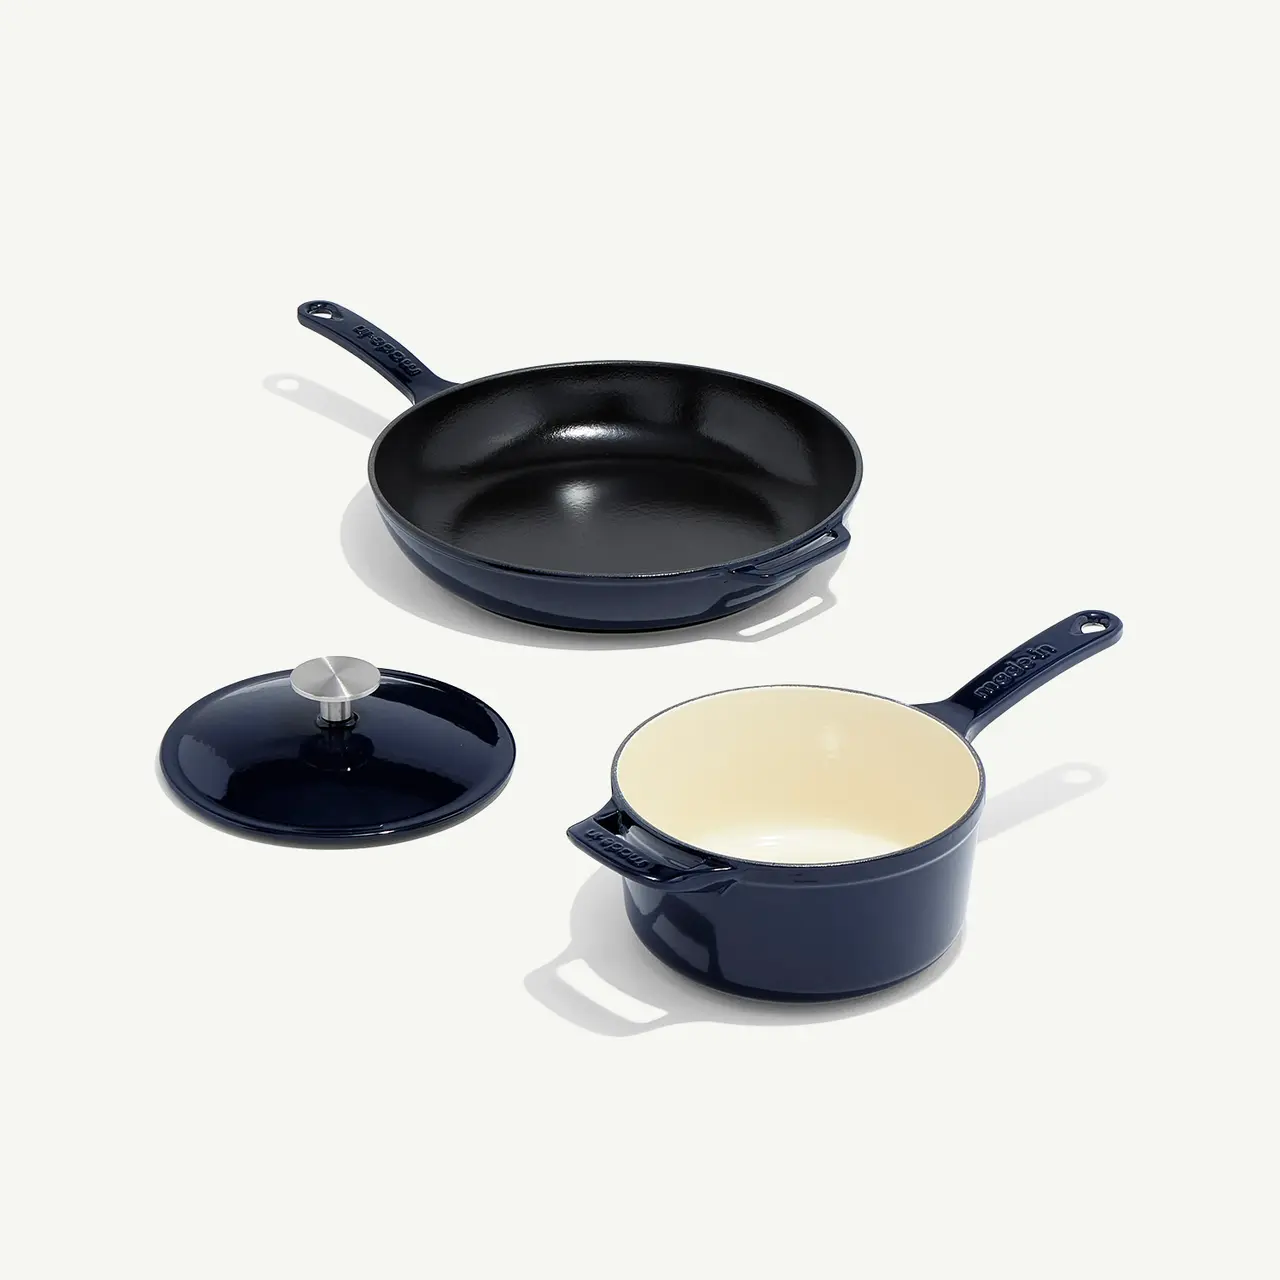 A set of dark blue cookware, including a skillet and a saucepan with a lid, arranged neatly on a light background.